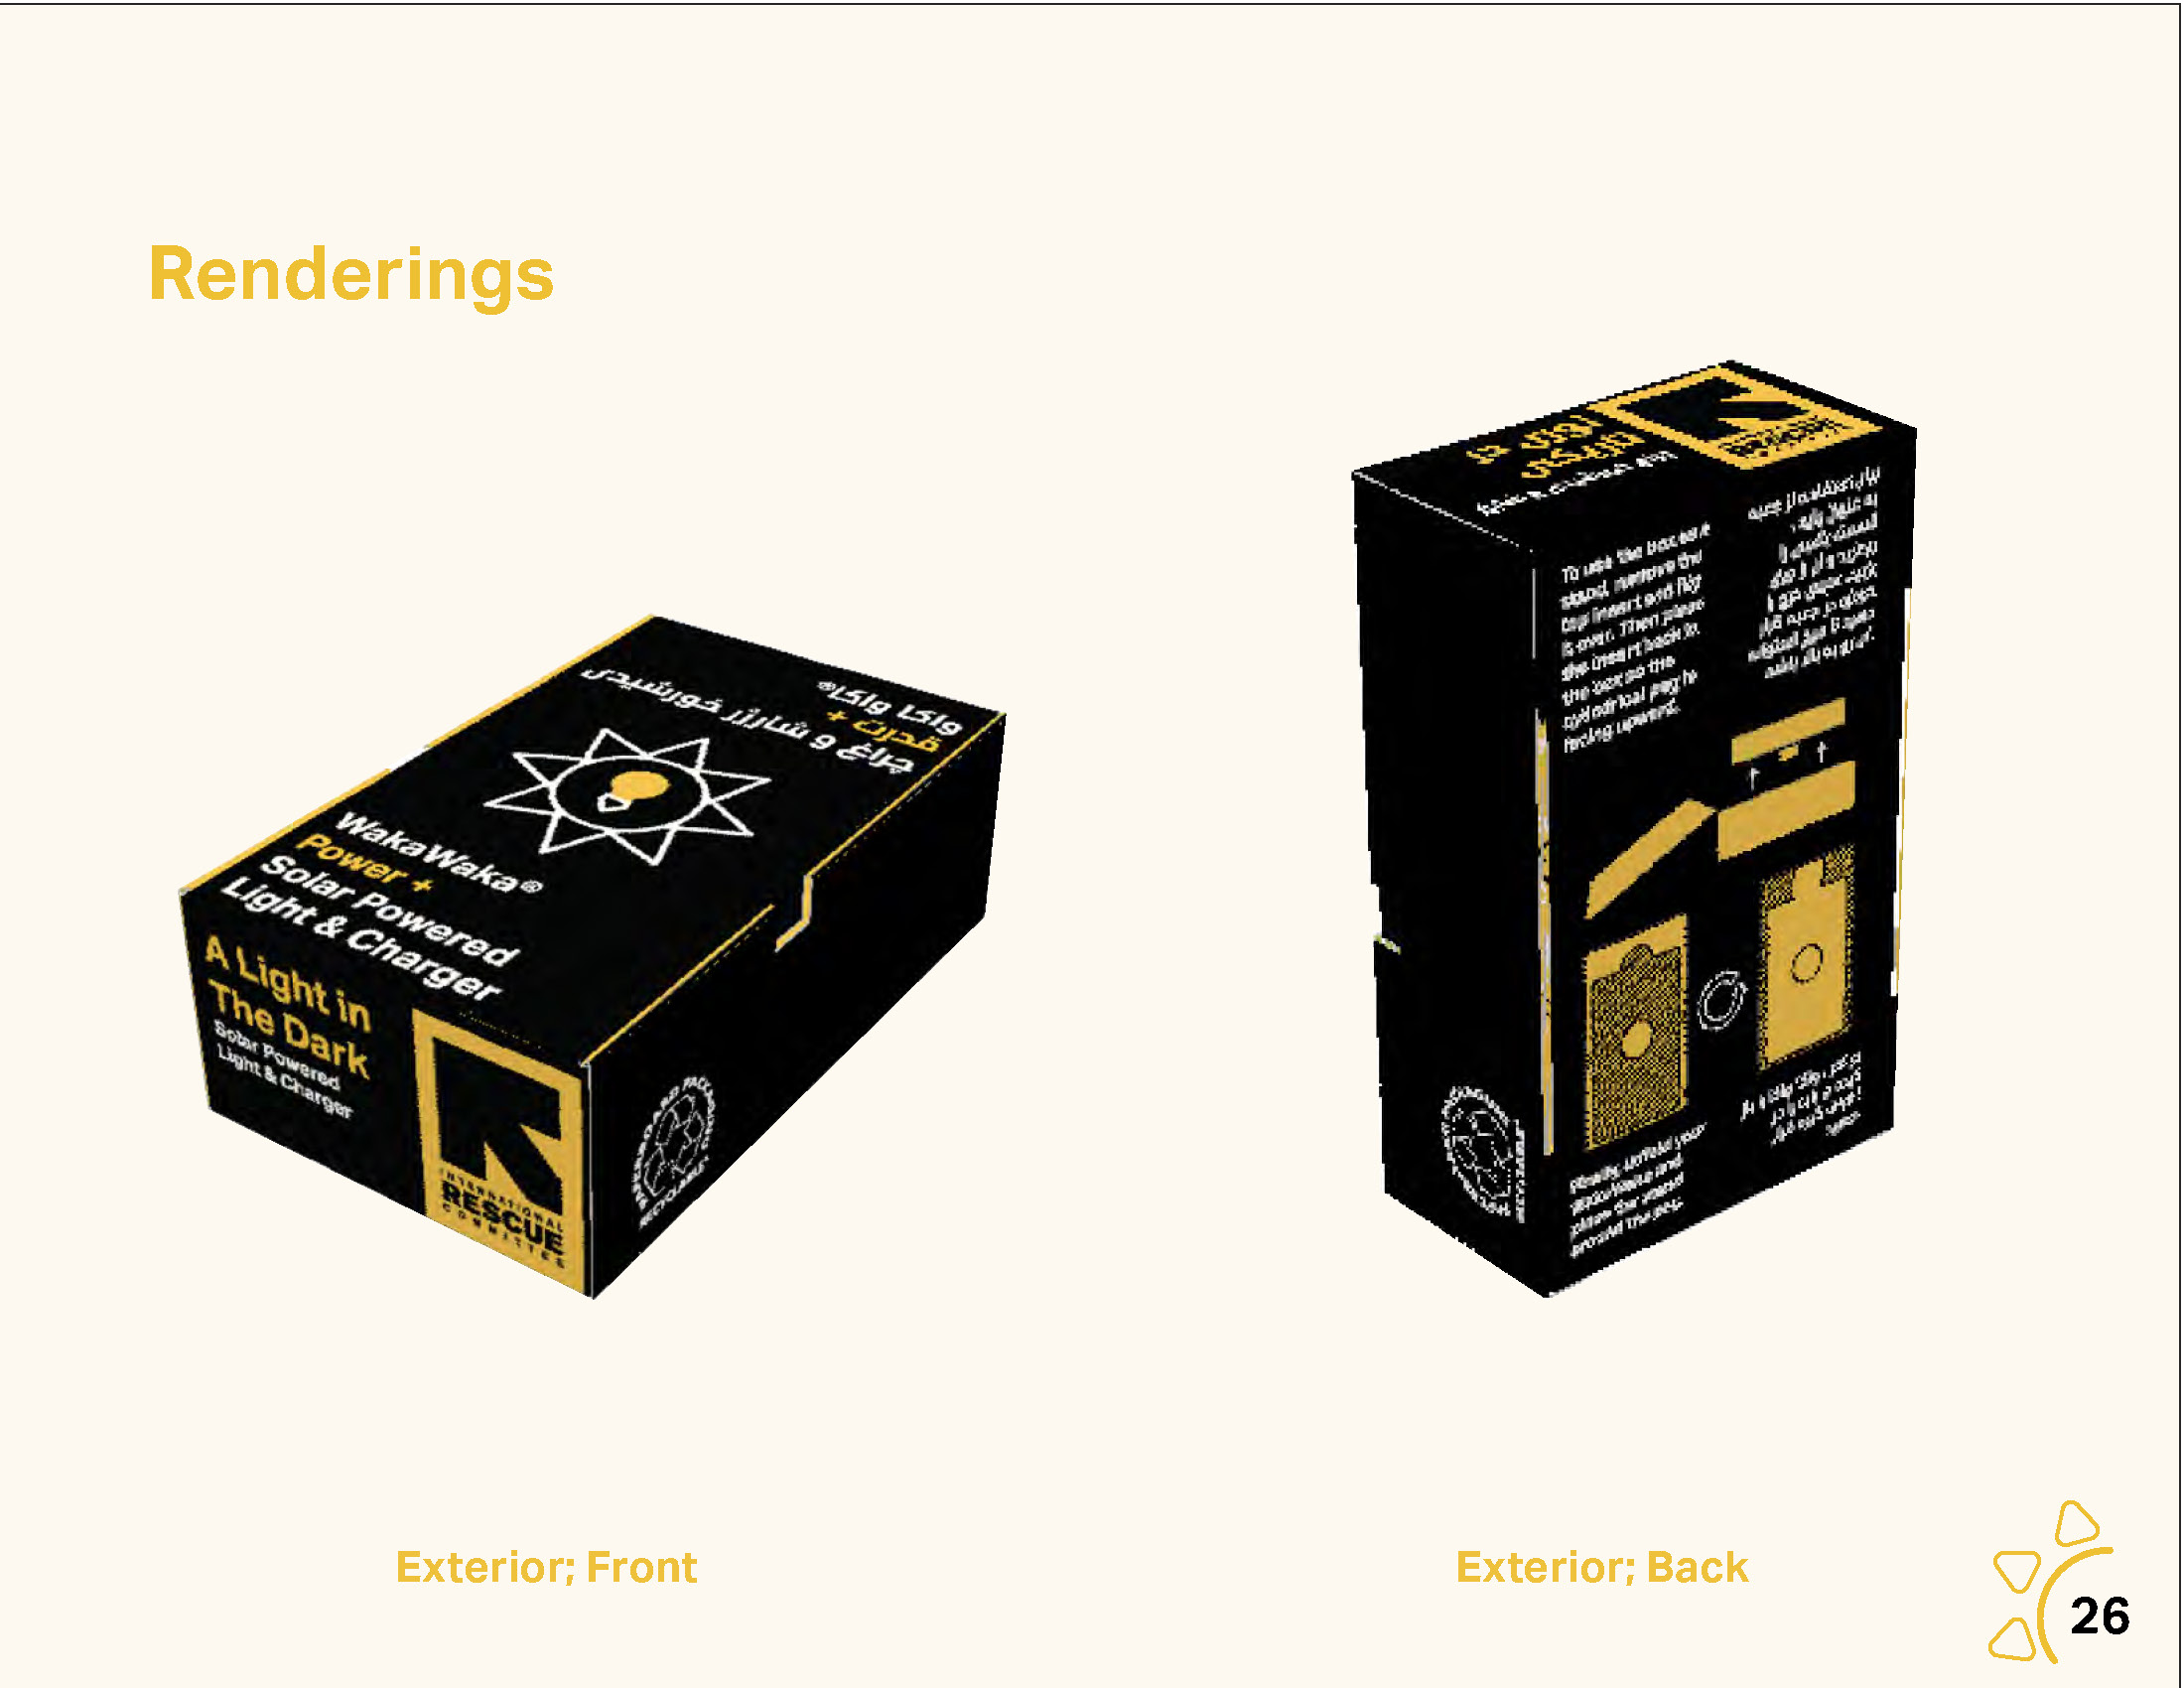 Two views of a packaging design for International Rescue Organization.